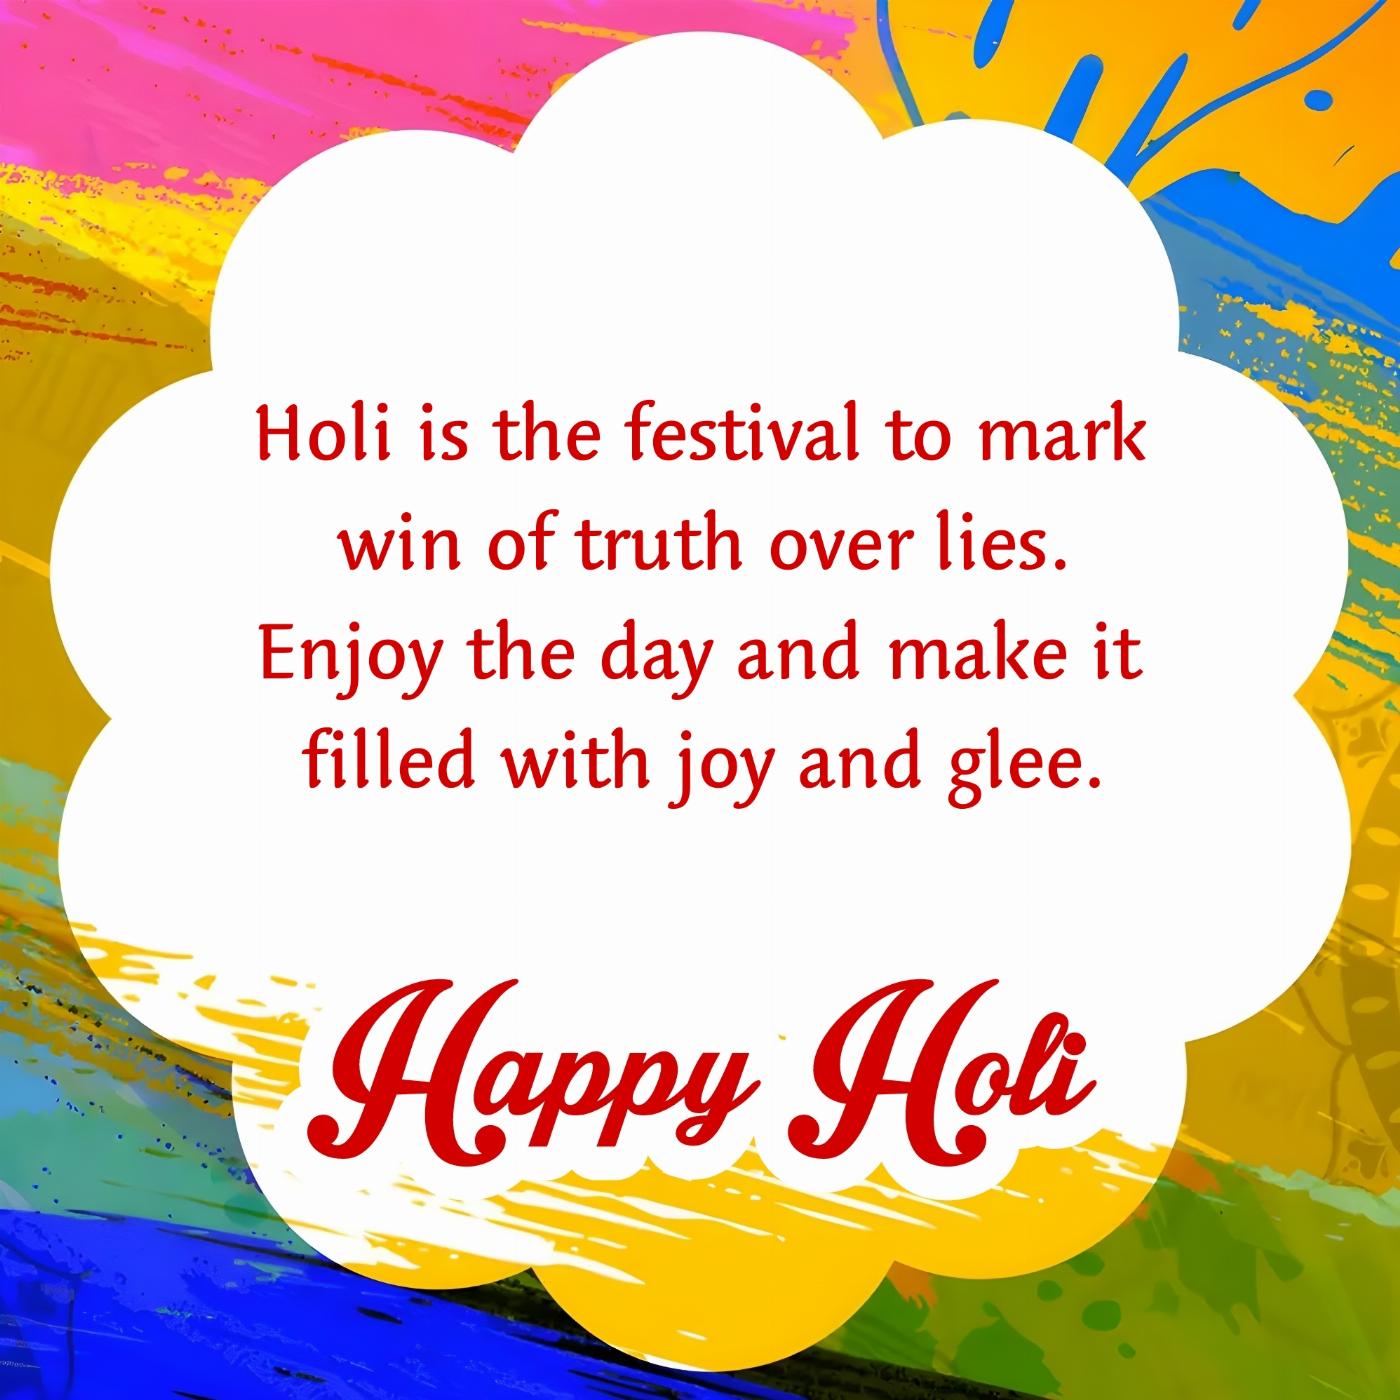 Holi is the festival to mark win of truth over lies